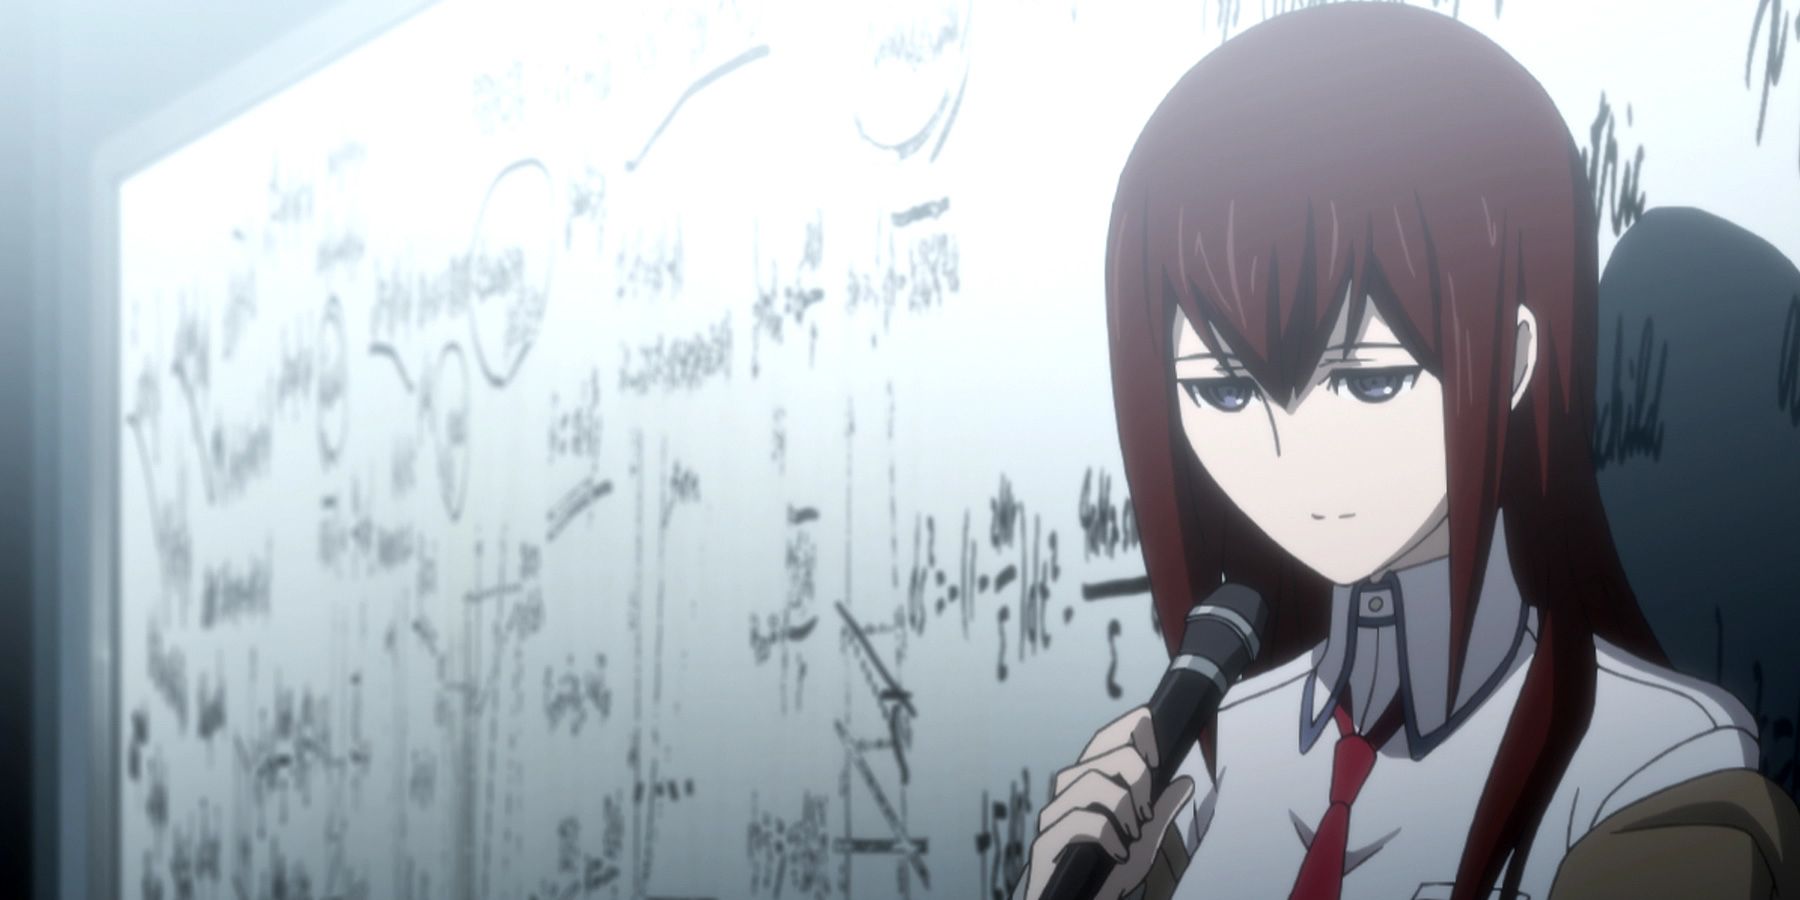 Kurisu-delivering-a-lecture-in-the-Steins-Gate-anime-1